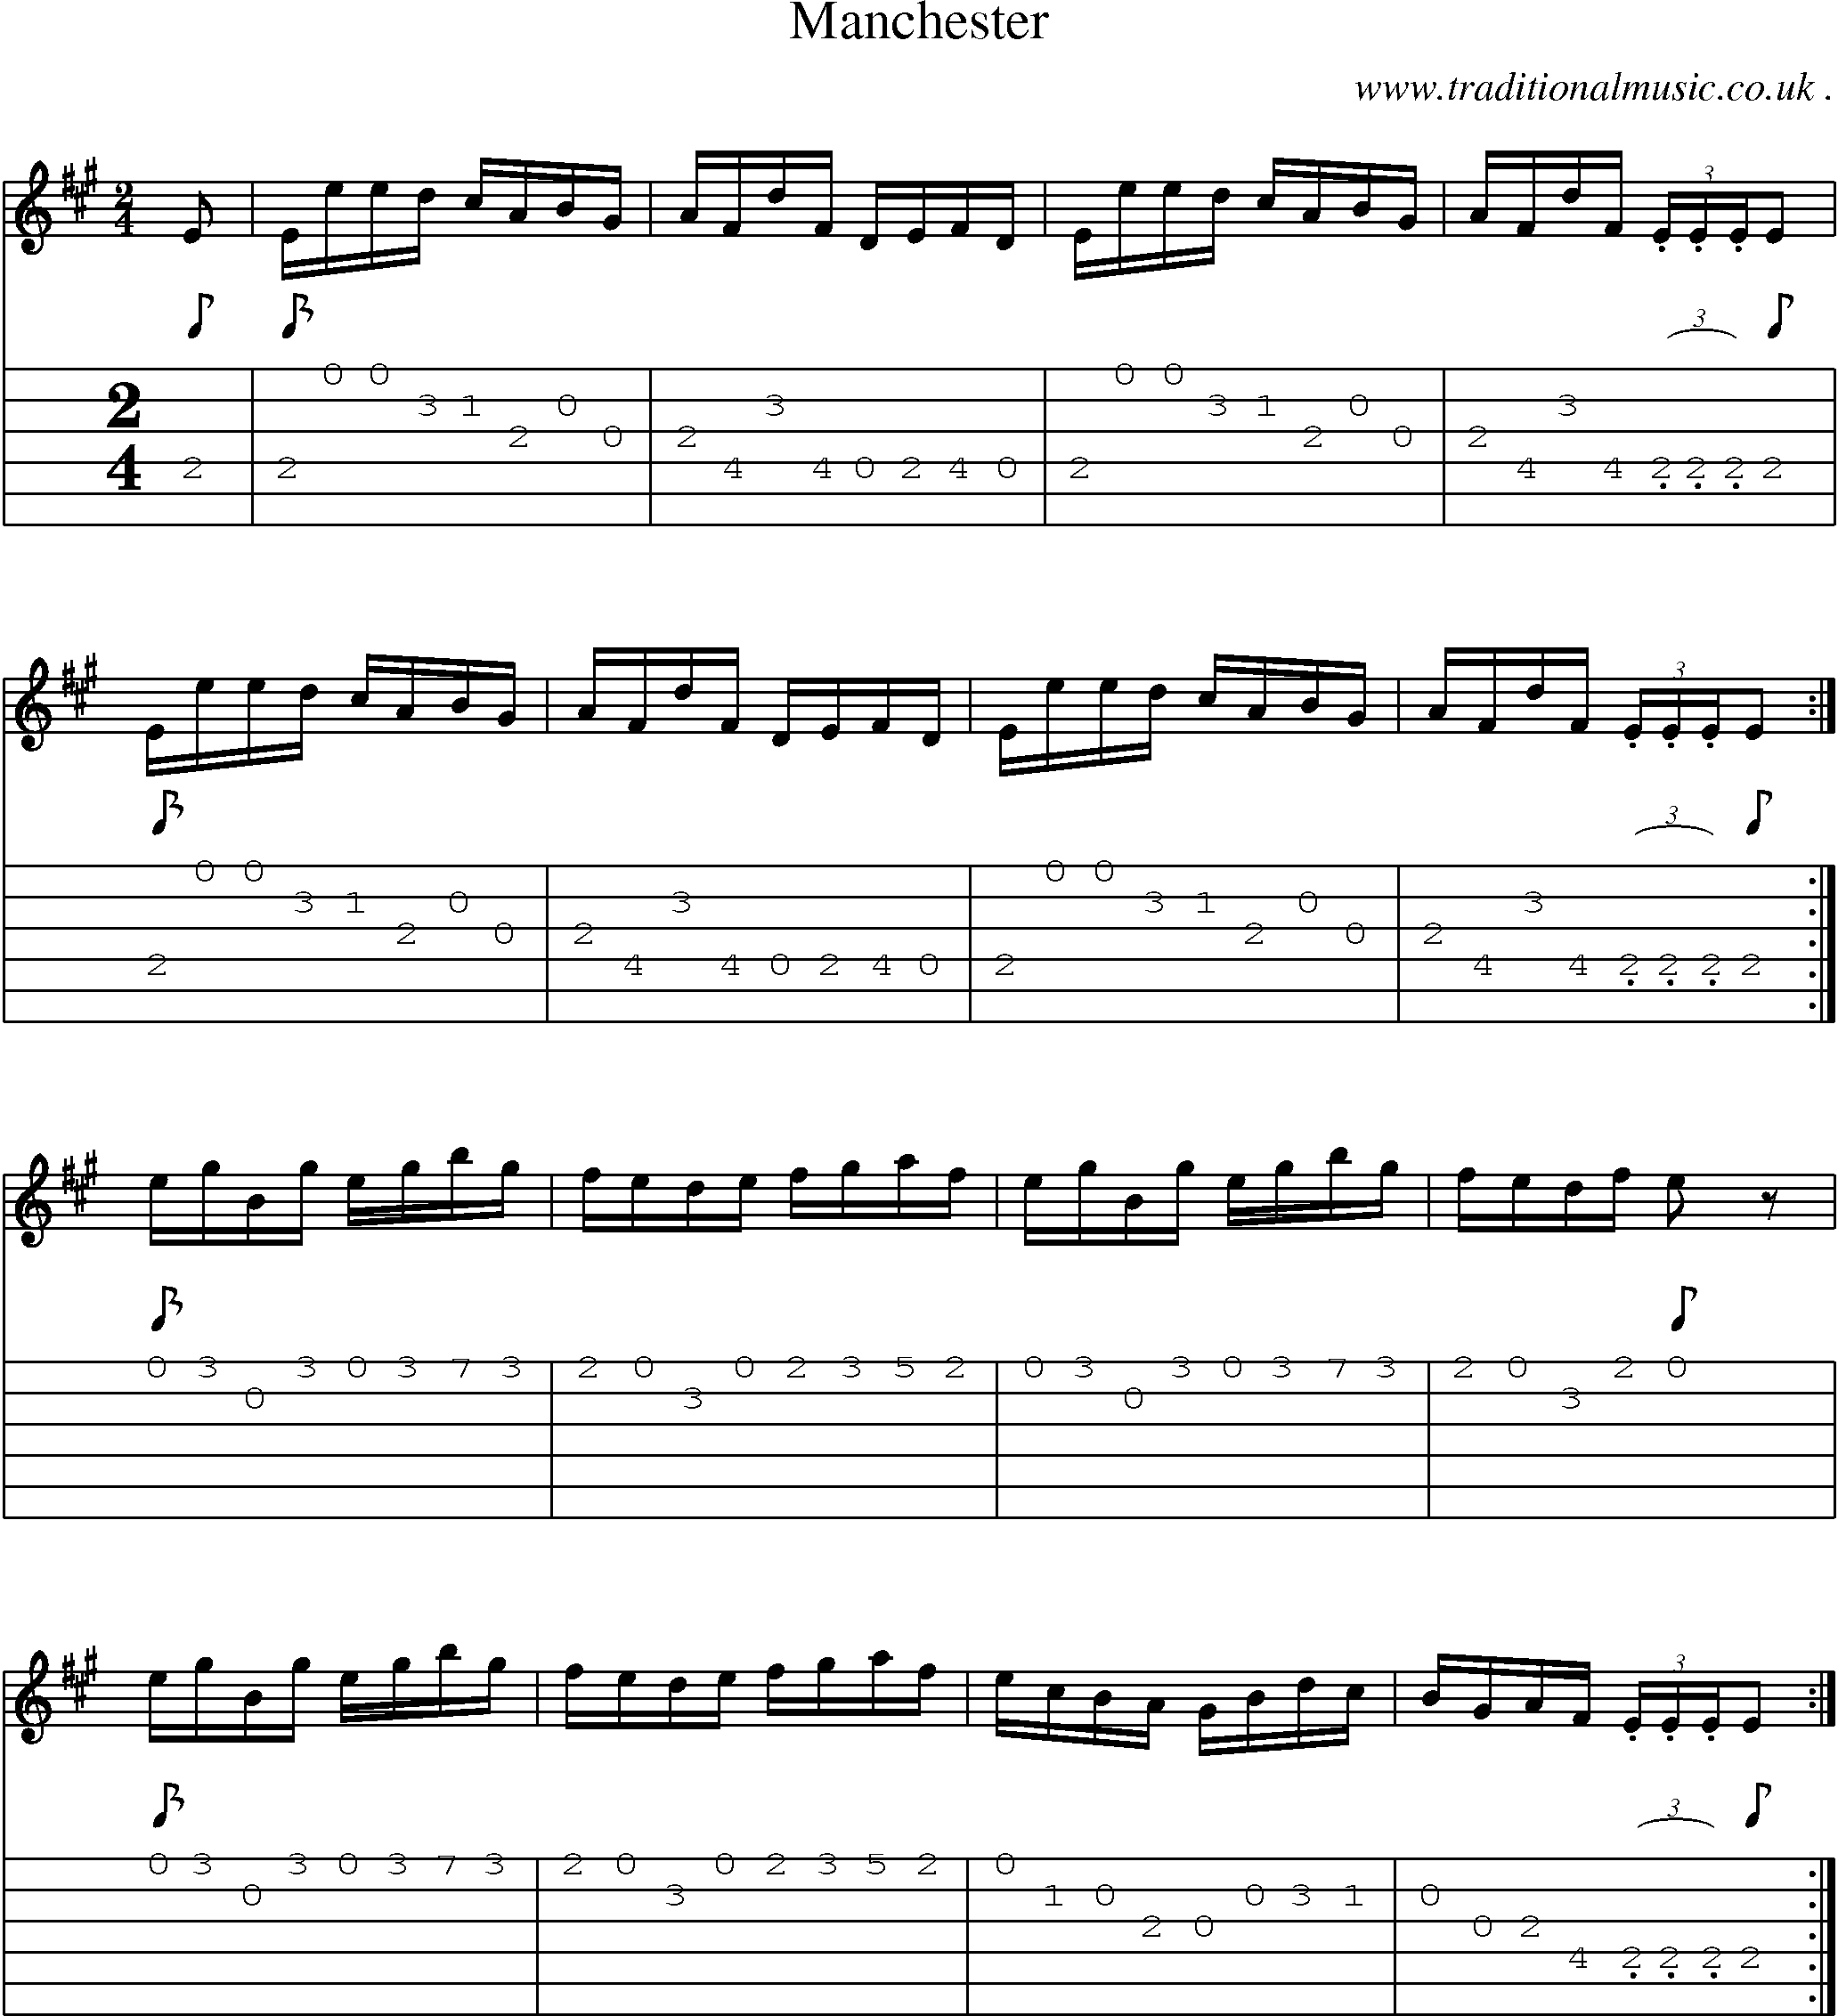 Sheet-Music and Guitar Tabs for Manchester